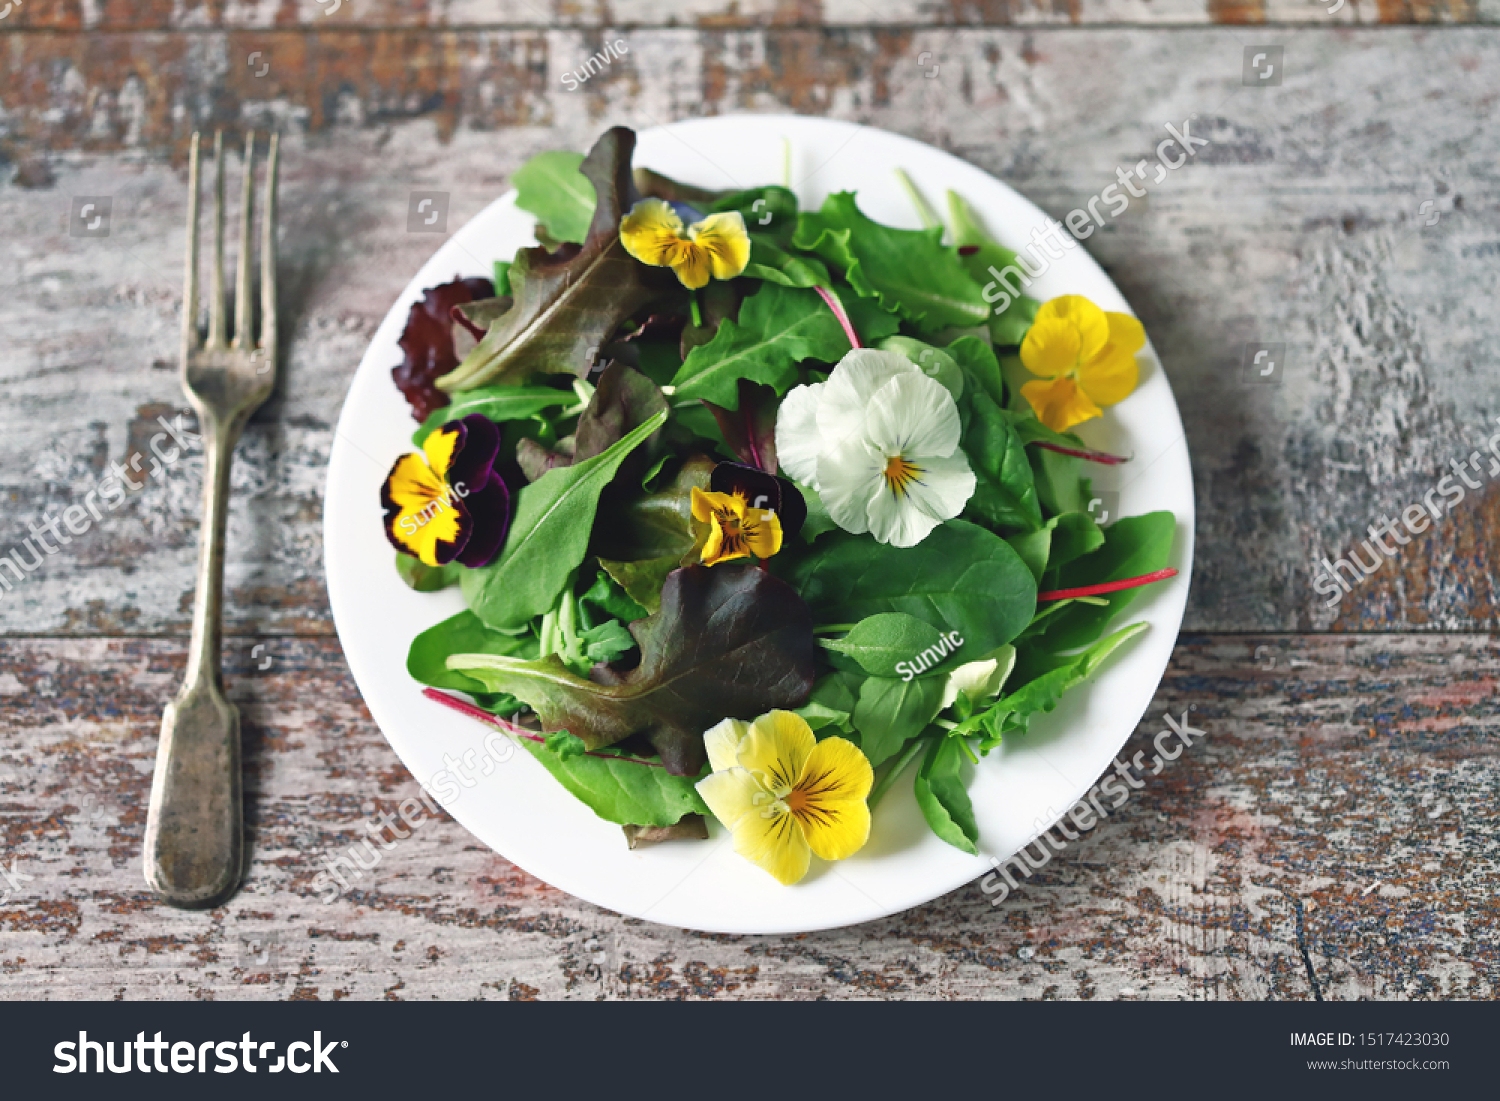 Beautiful mix of salads with flowers on a white plate. Diet concept. Nutrition for girls. Healthy vegan food. #1517423030